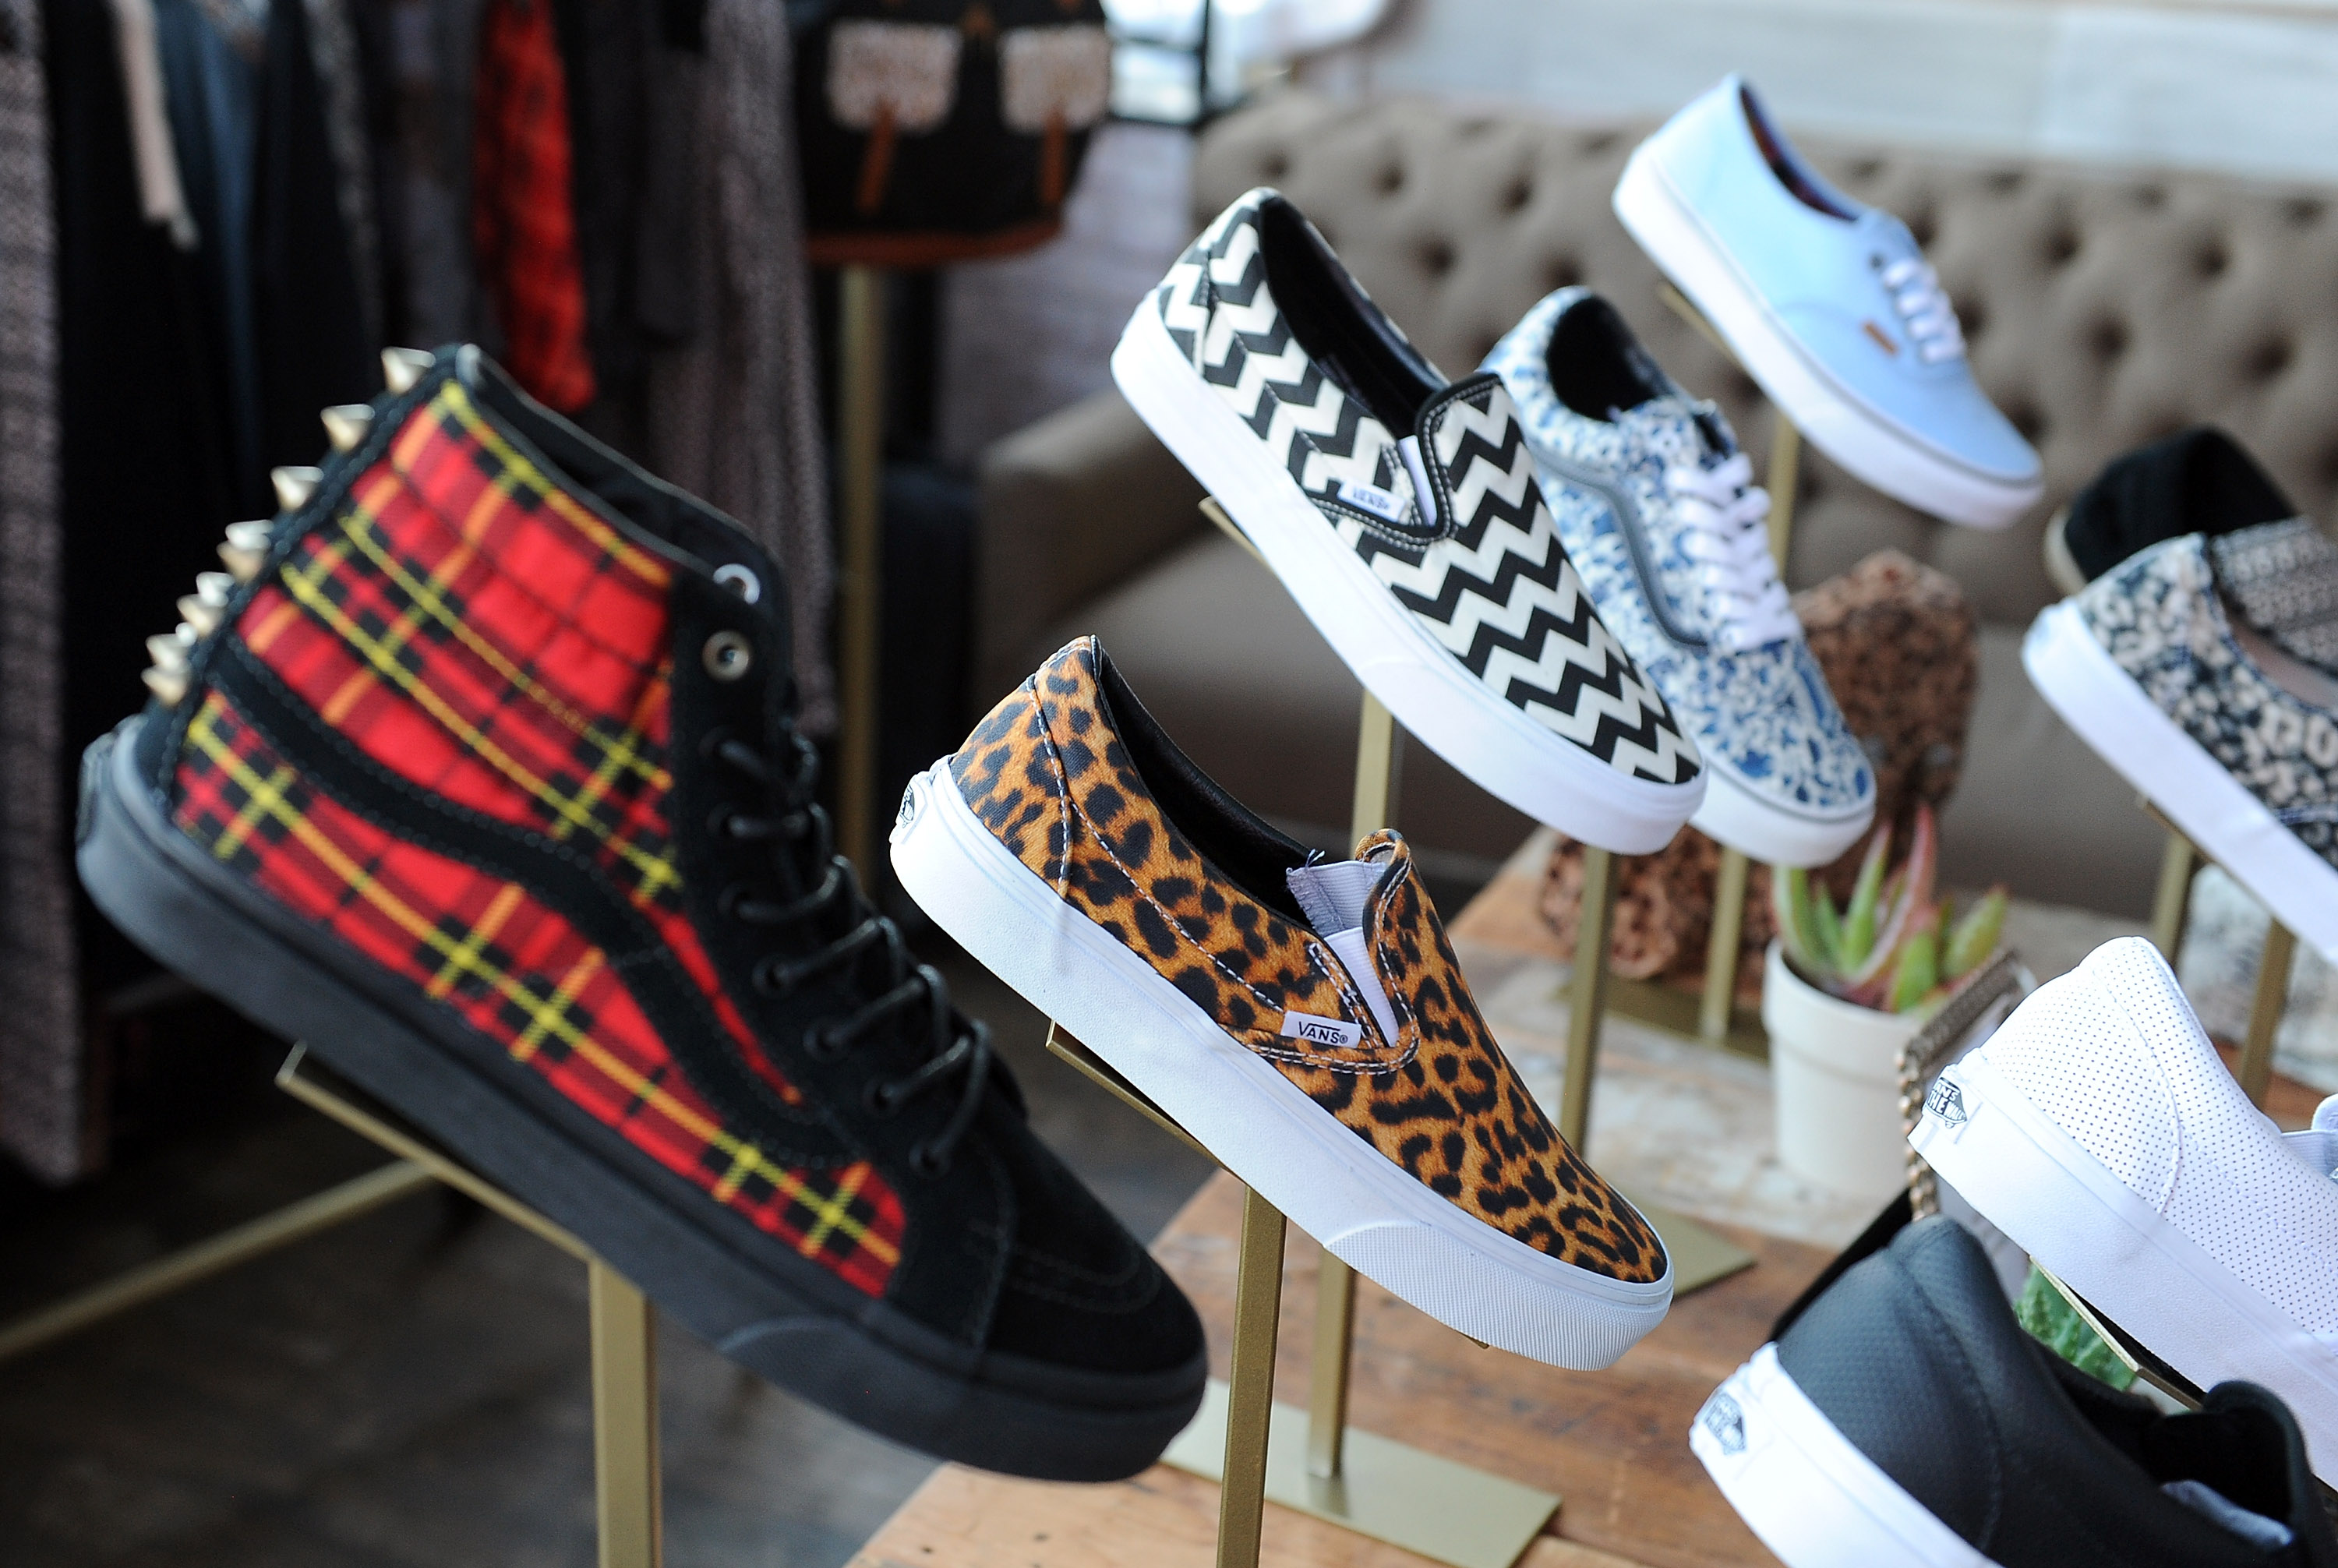 vans of the world shoes